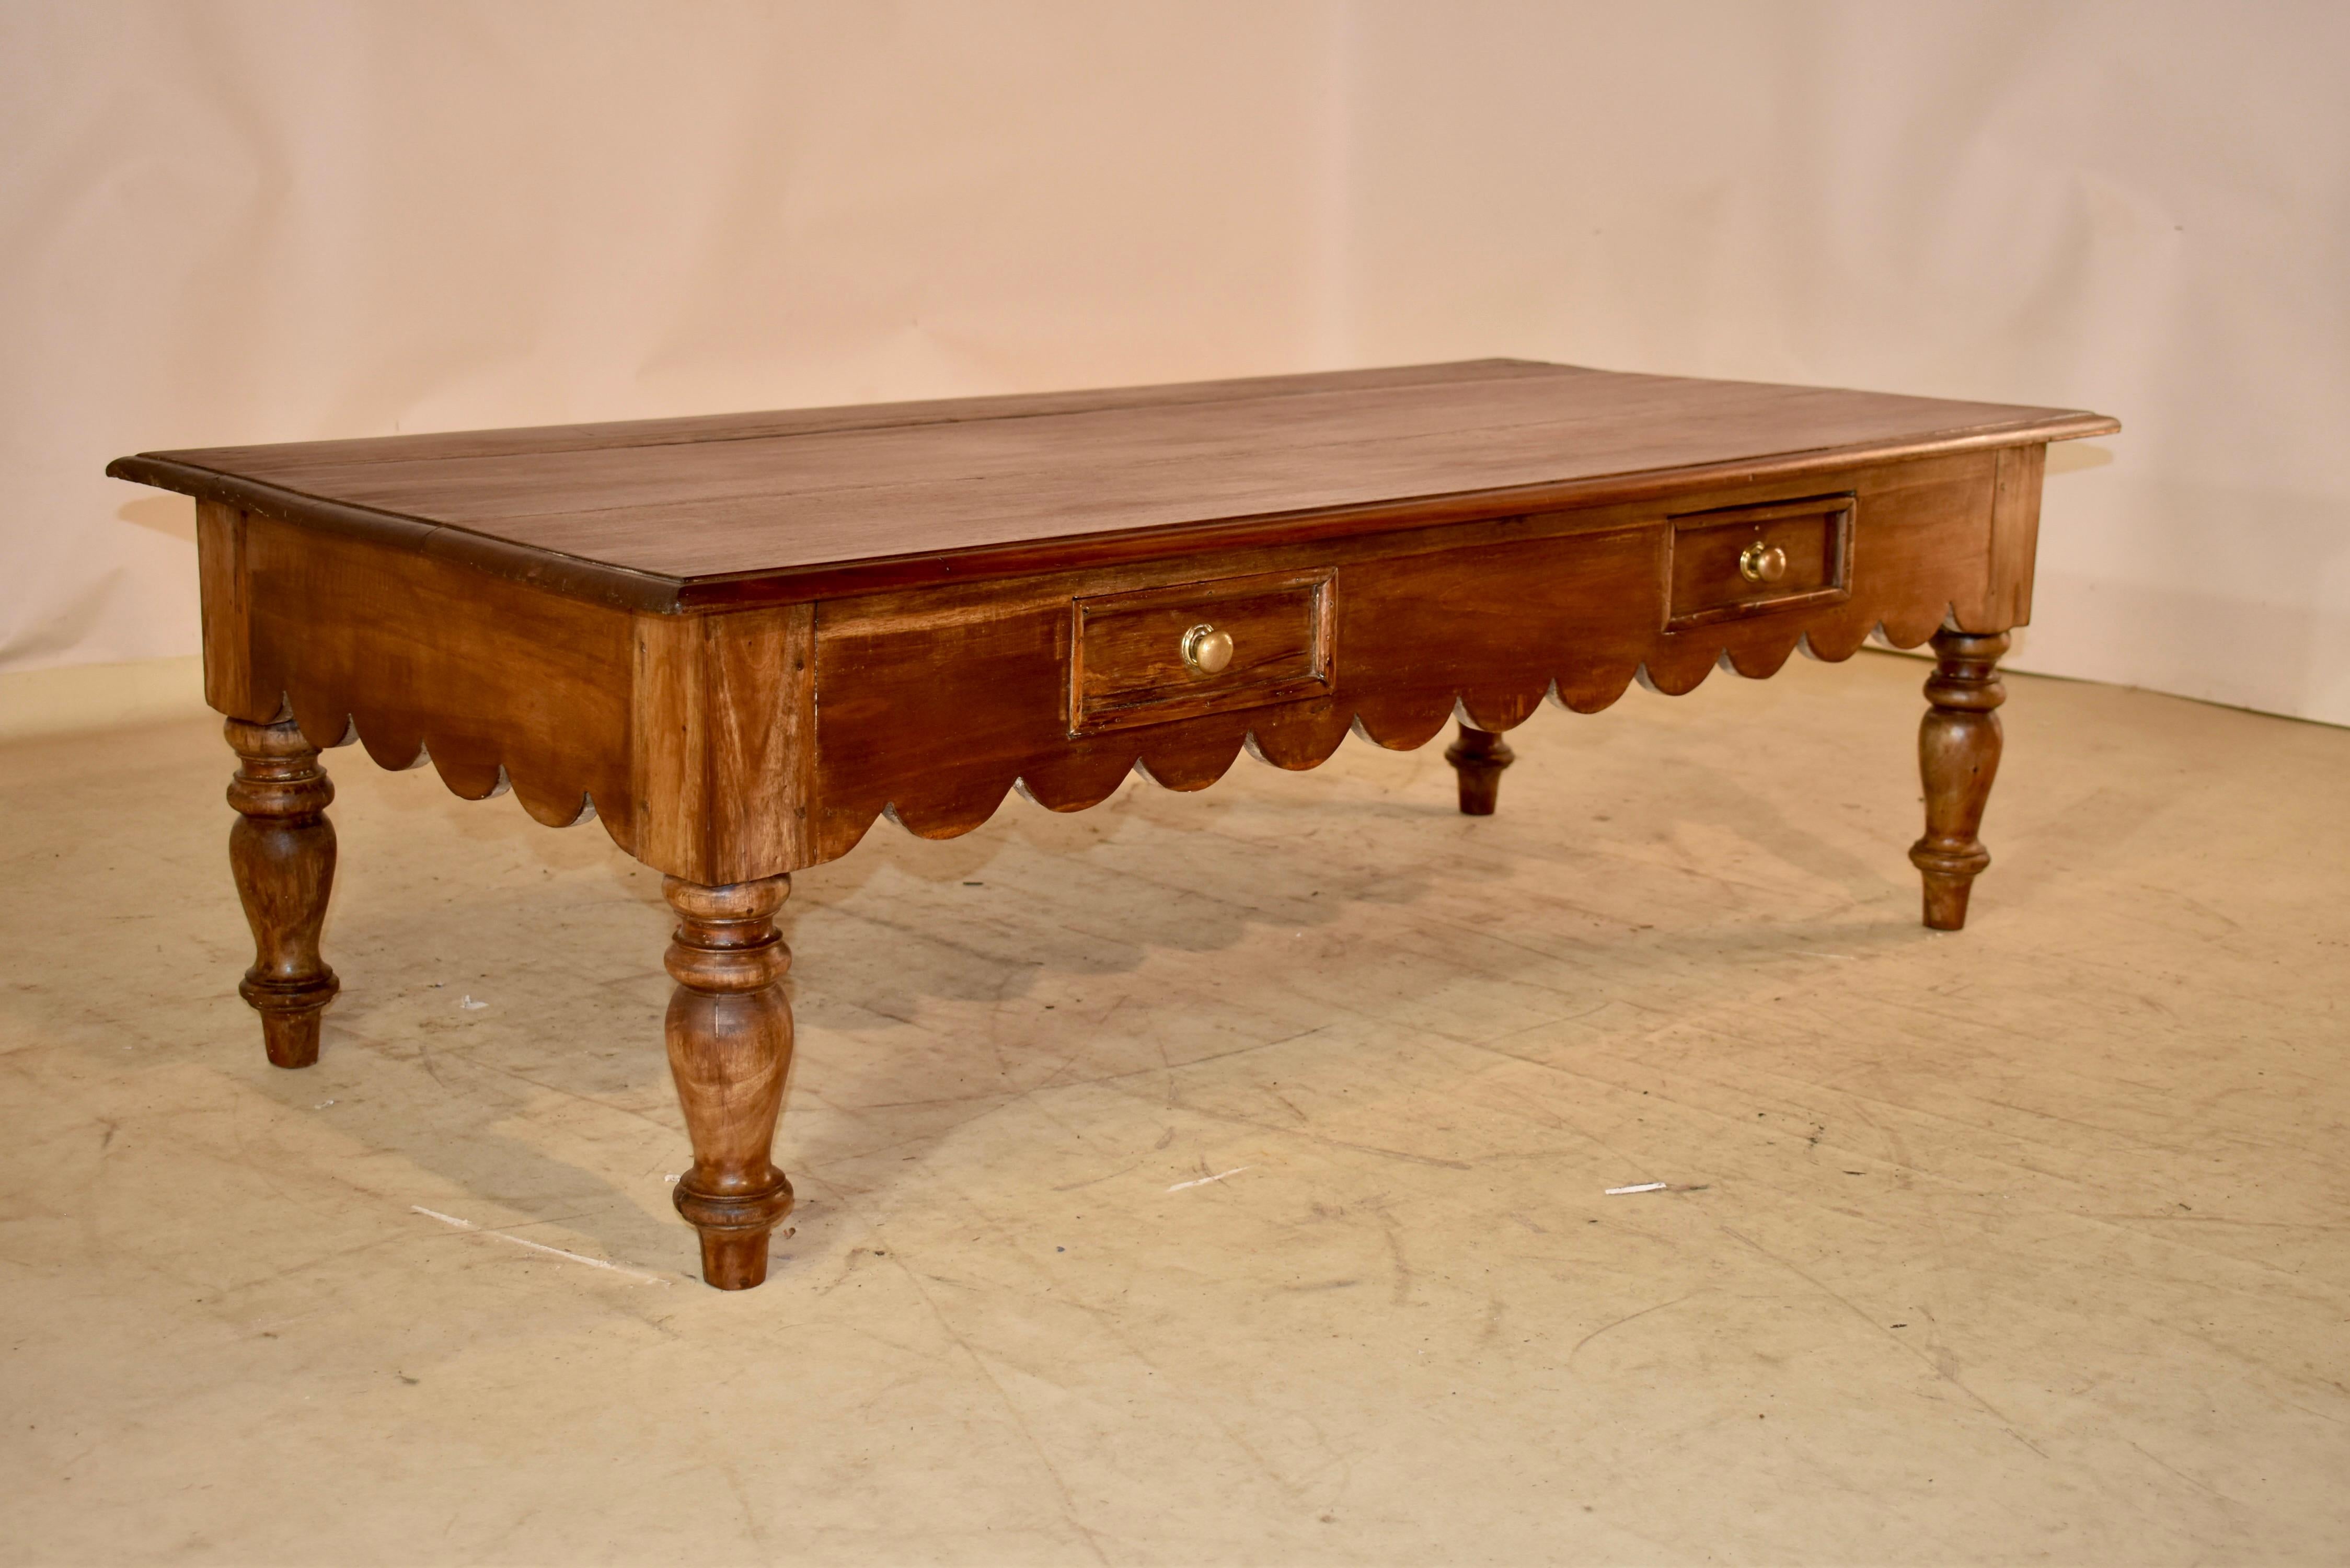 Rustic teak coffee table from England, circa 1900-1920.  The top is made from planks and has a refined beveled edge.  The aprons are simple and have hand scalloping along the bottom edges for added design interest.  There are two drawers in the